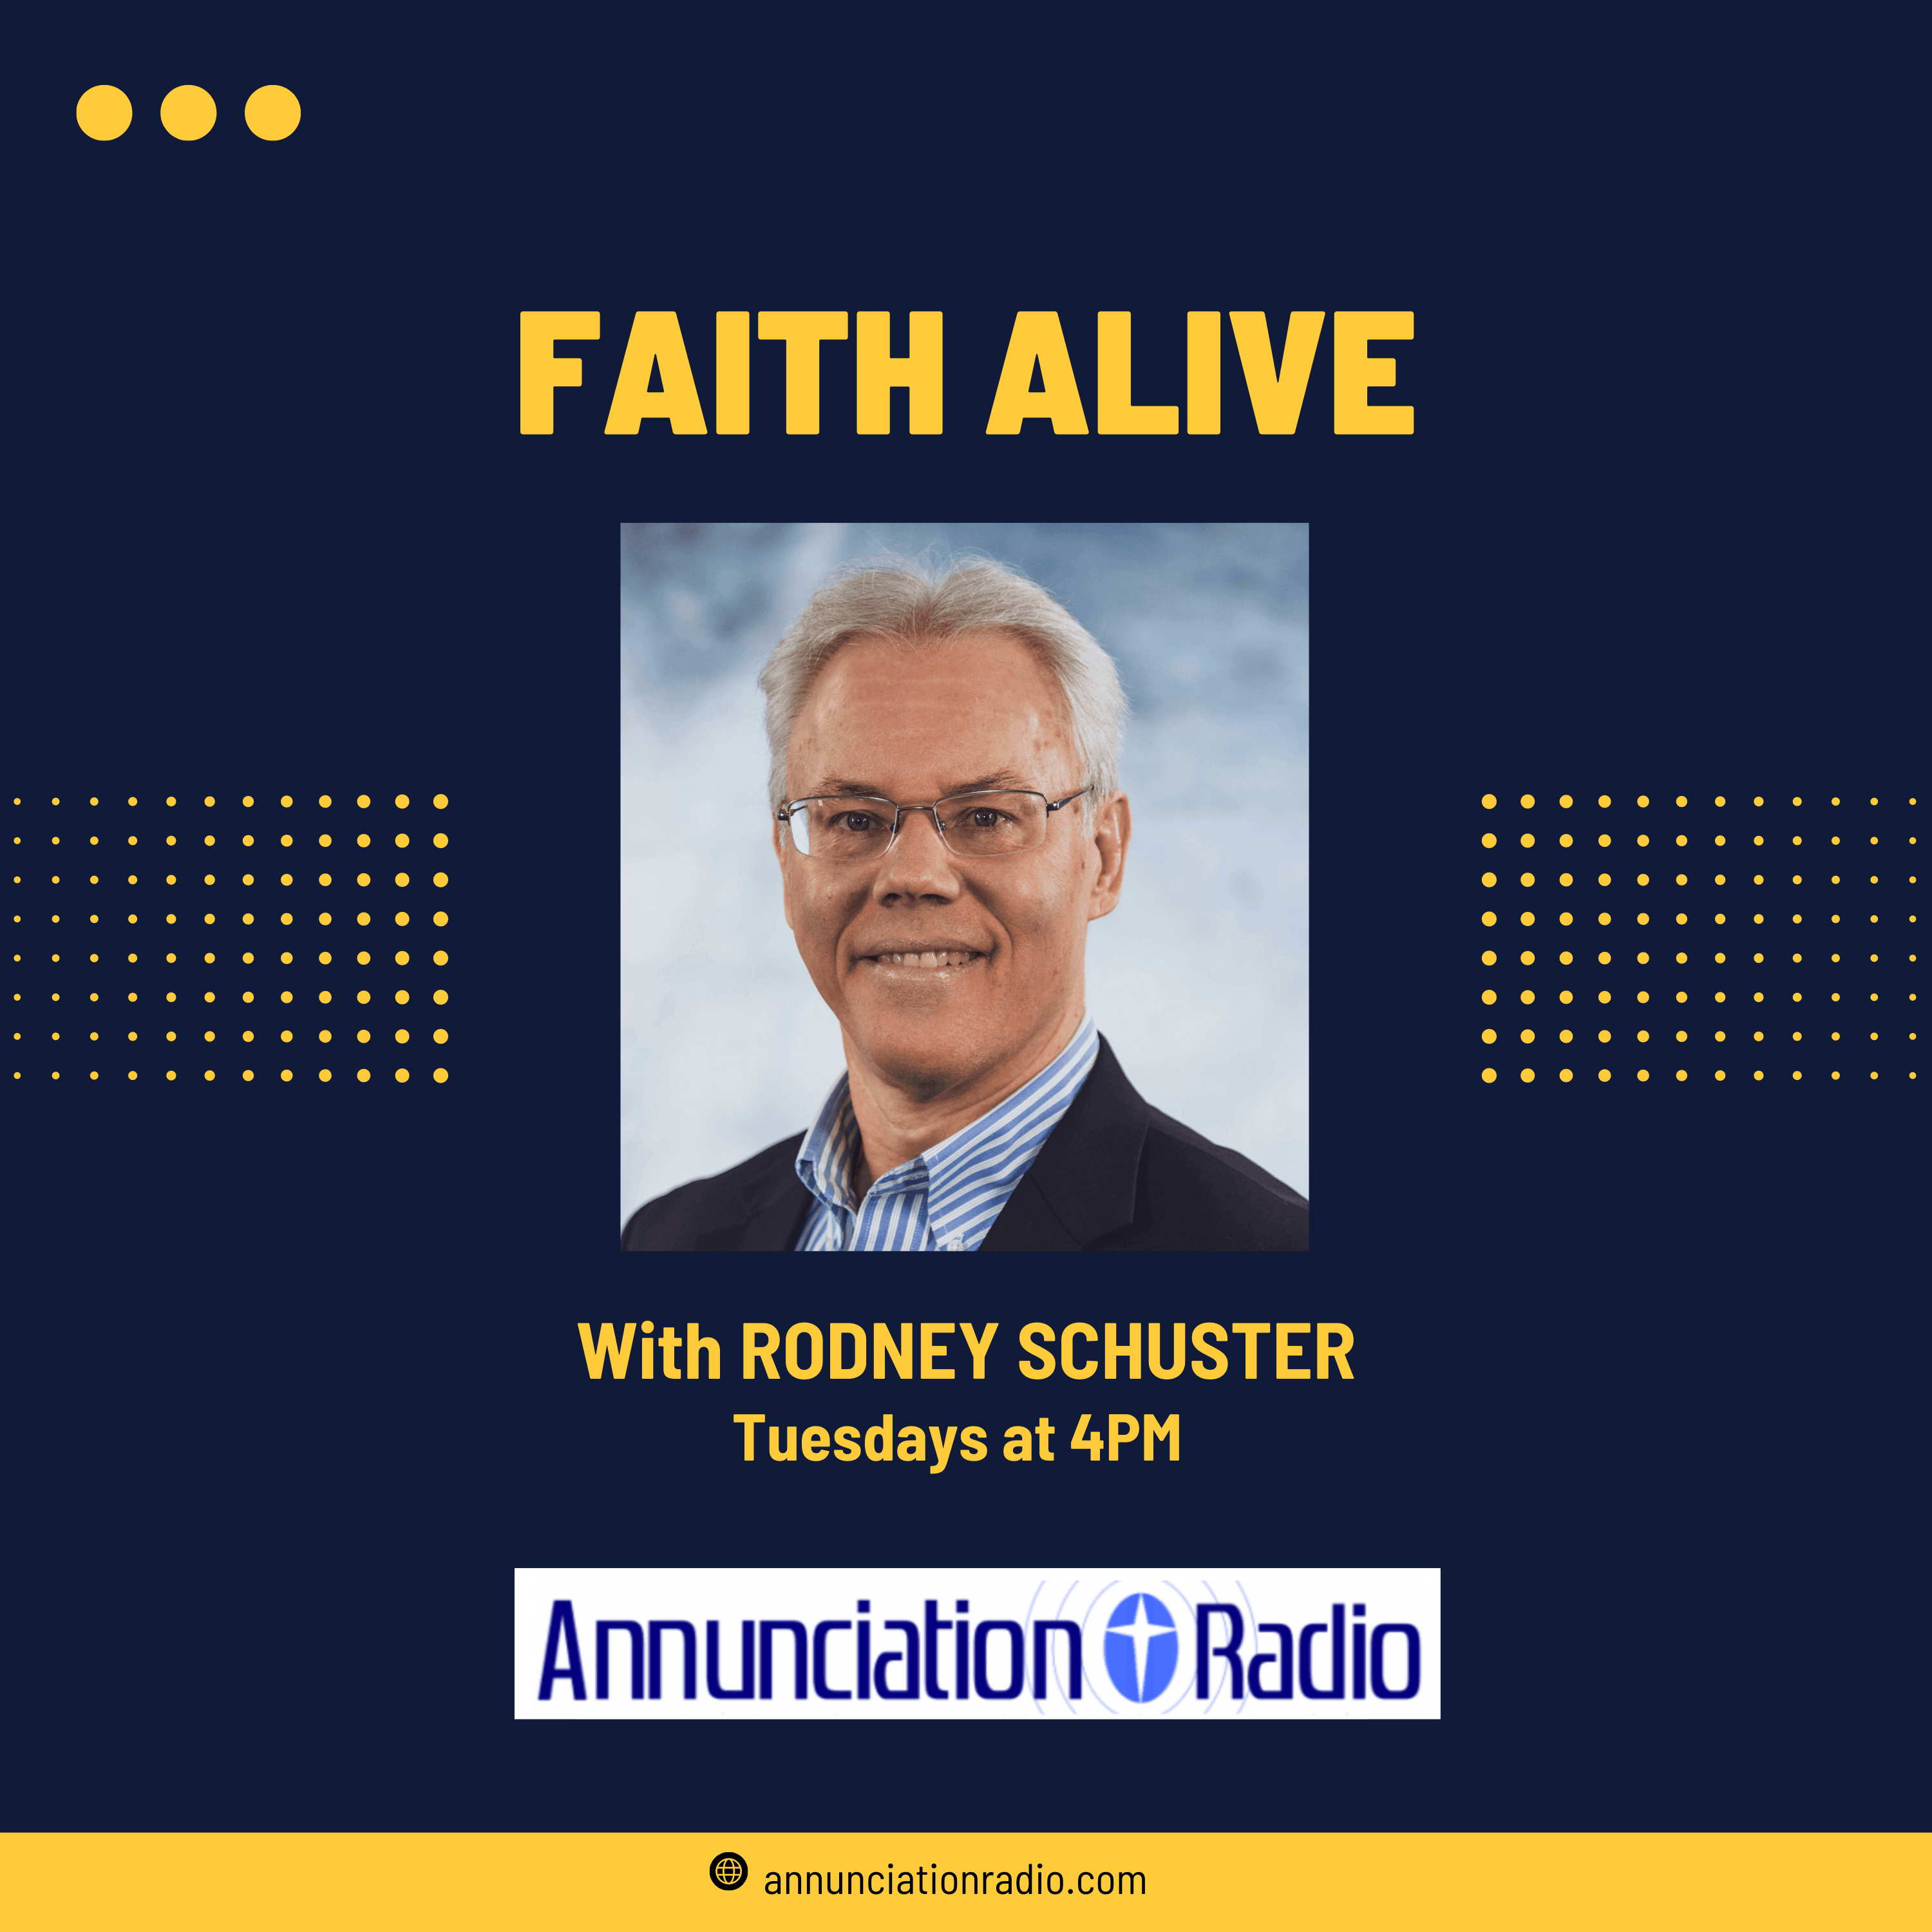 Catholic Charities Diocese of Toledo's hour-long Faith Alive program airs weekly on Annunciation Radio on Tuesdays at 4 p.m. and is re-broadcast at 3 p.m. on Saturdays. Listen to archived "Faith Alive" programs on demand.